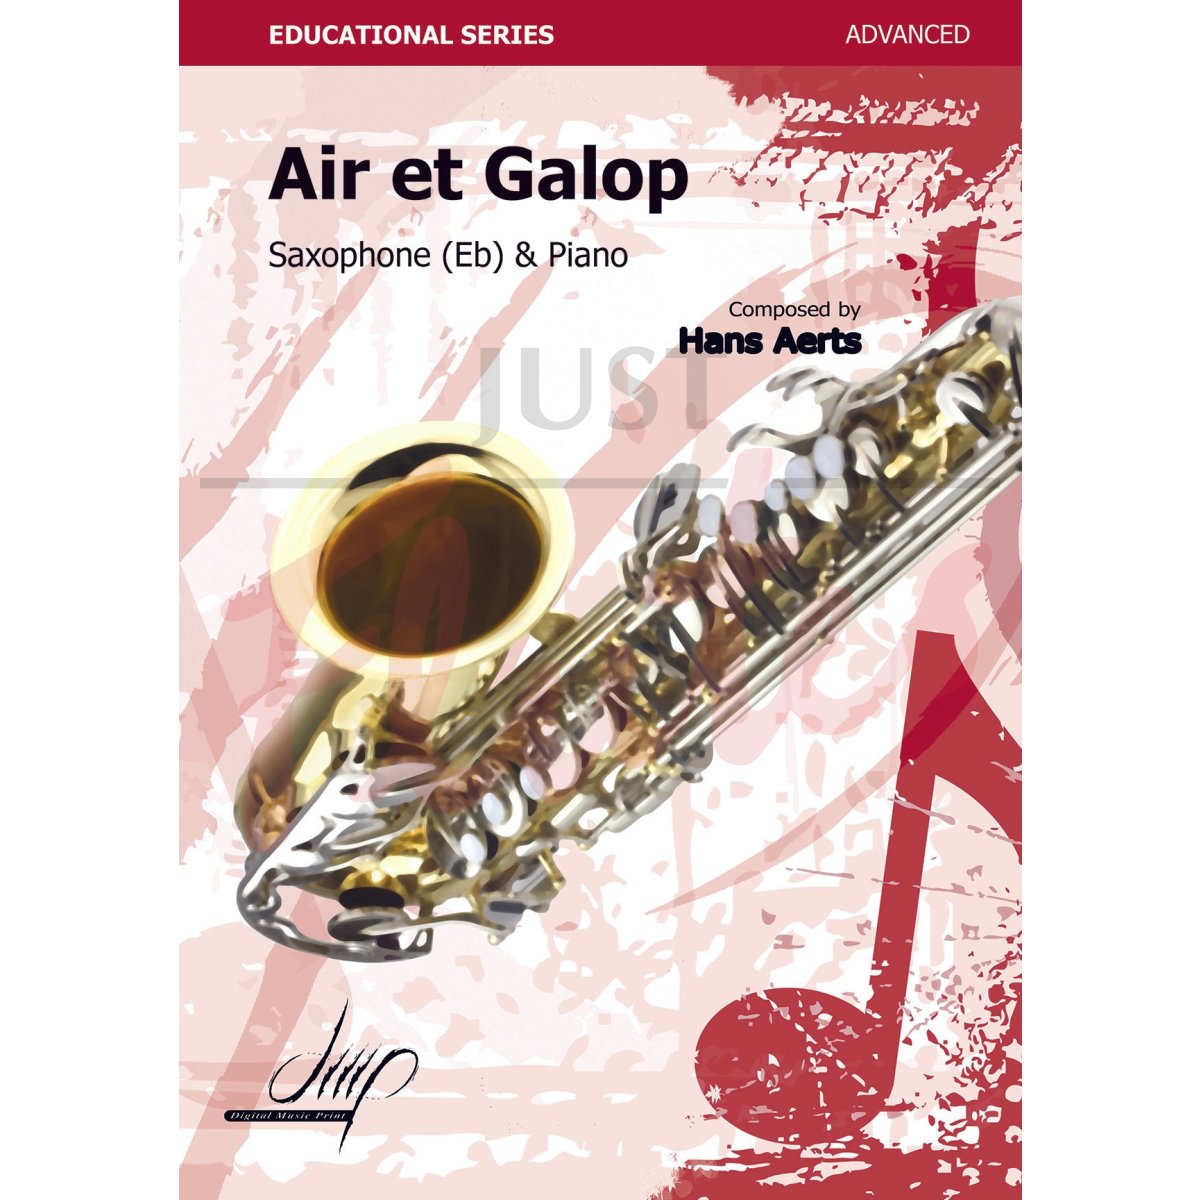 Air et Galop for Alto Saxophone and Piano